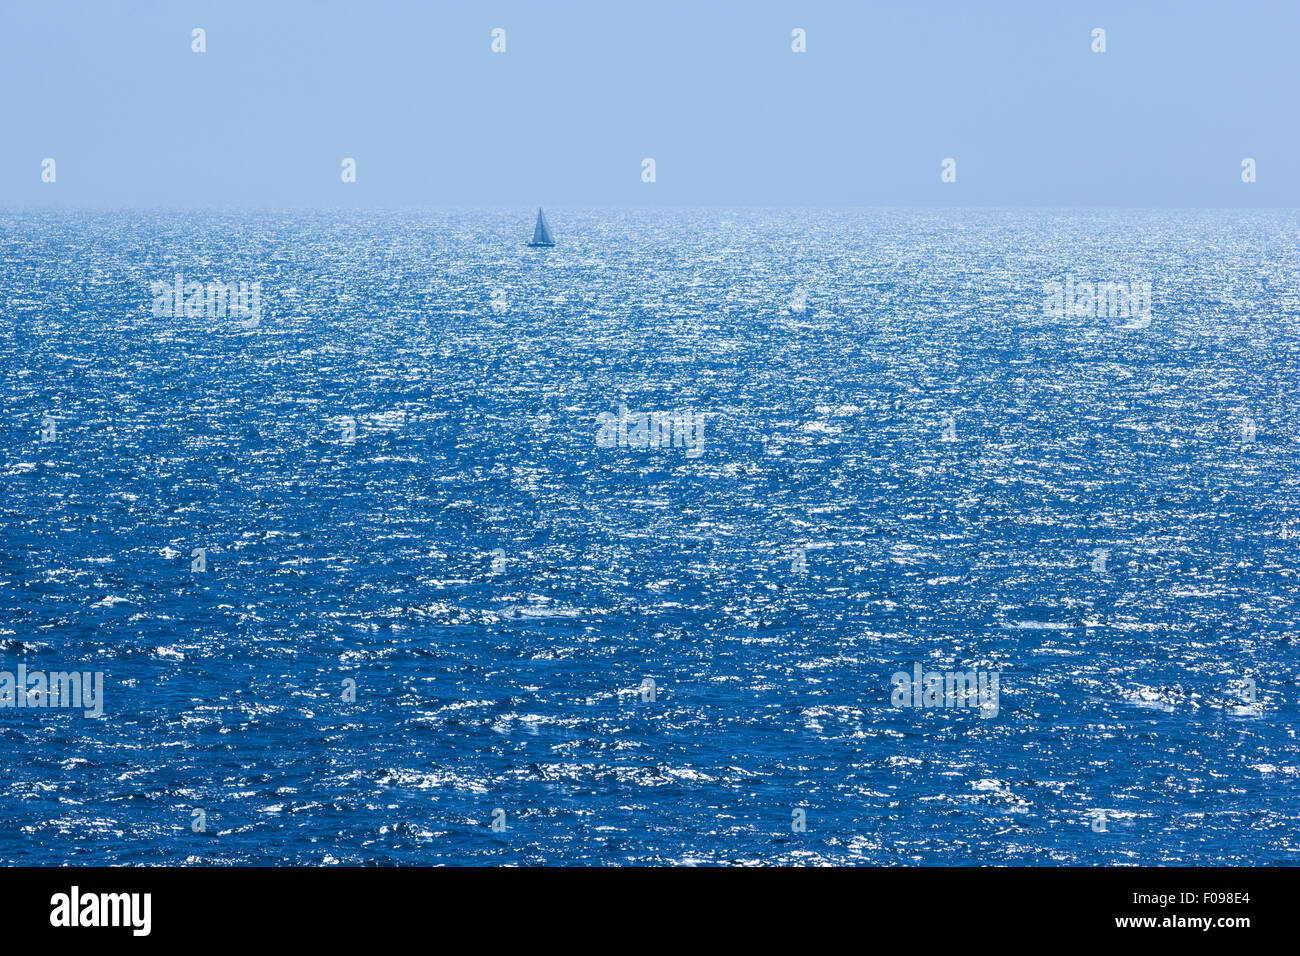 Sunlight shimmering on a blue sea in The English Channel Stock Photo